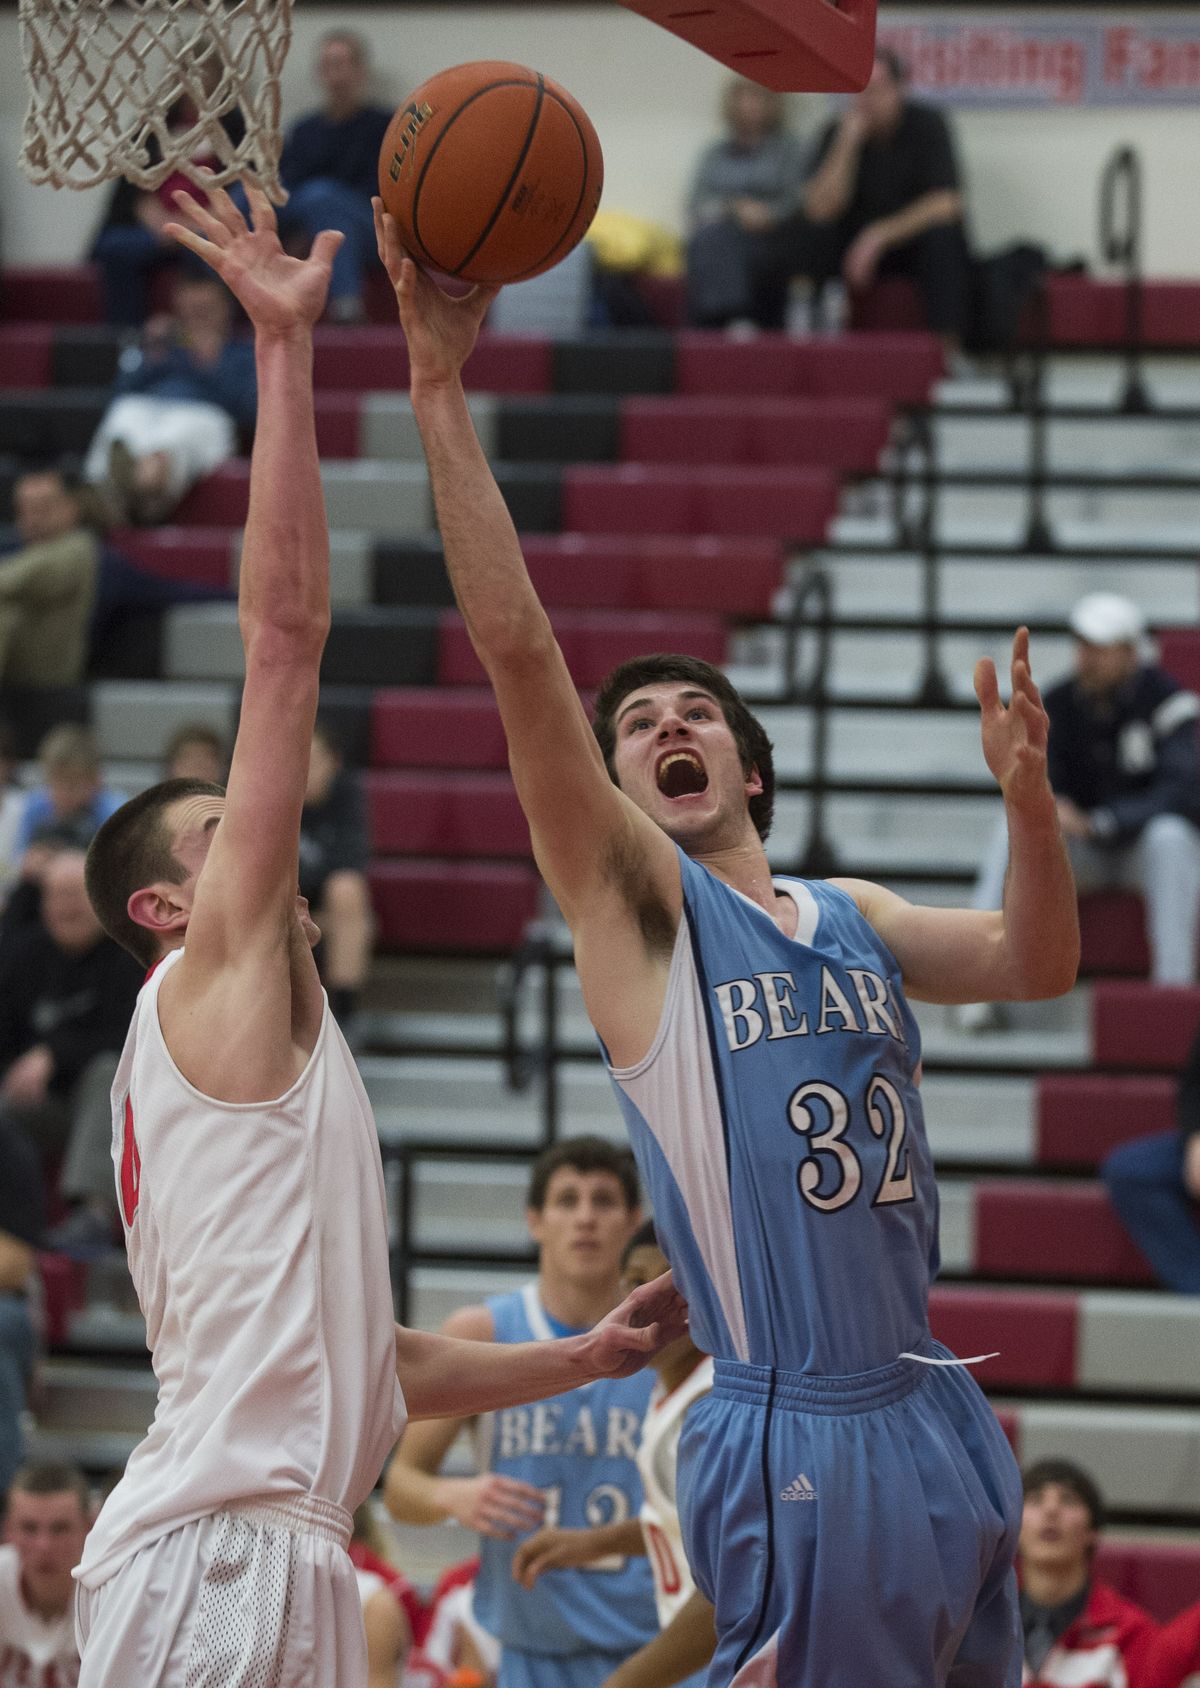 Central Valley’s Beau Byus looks to score over Ferris’ Jensen Rye on Tuesday. (Colin Mulvany)